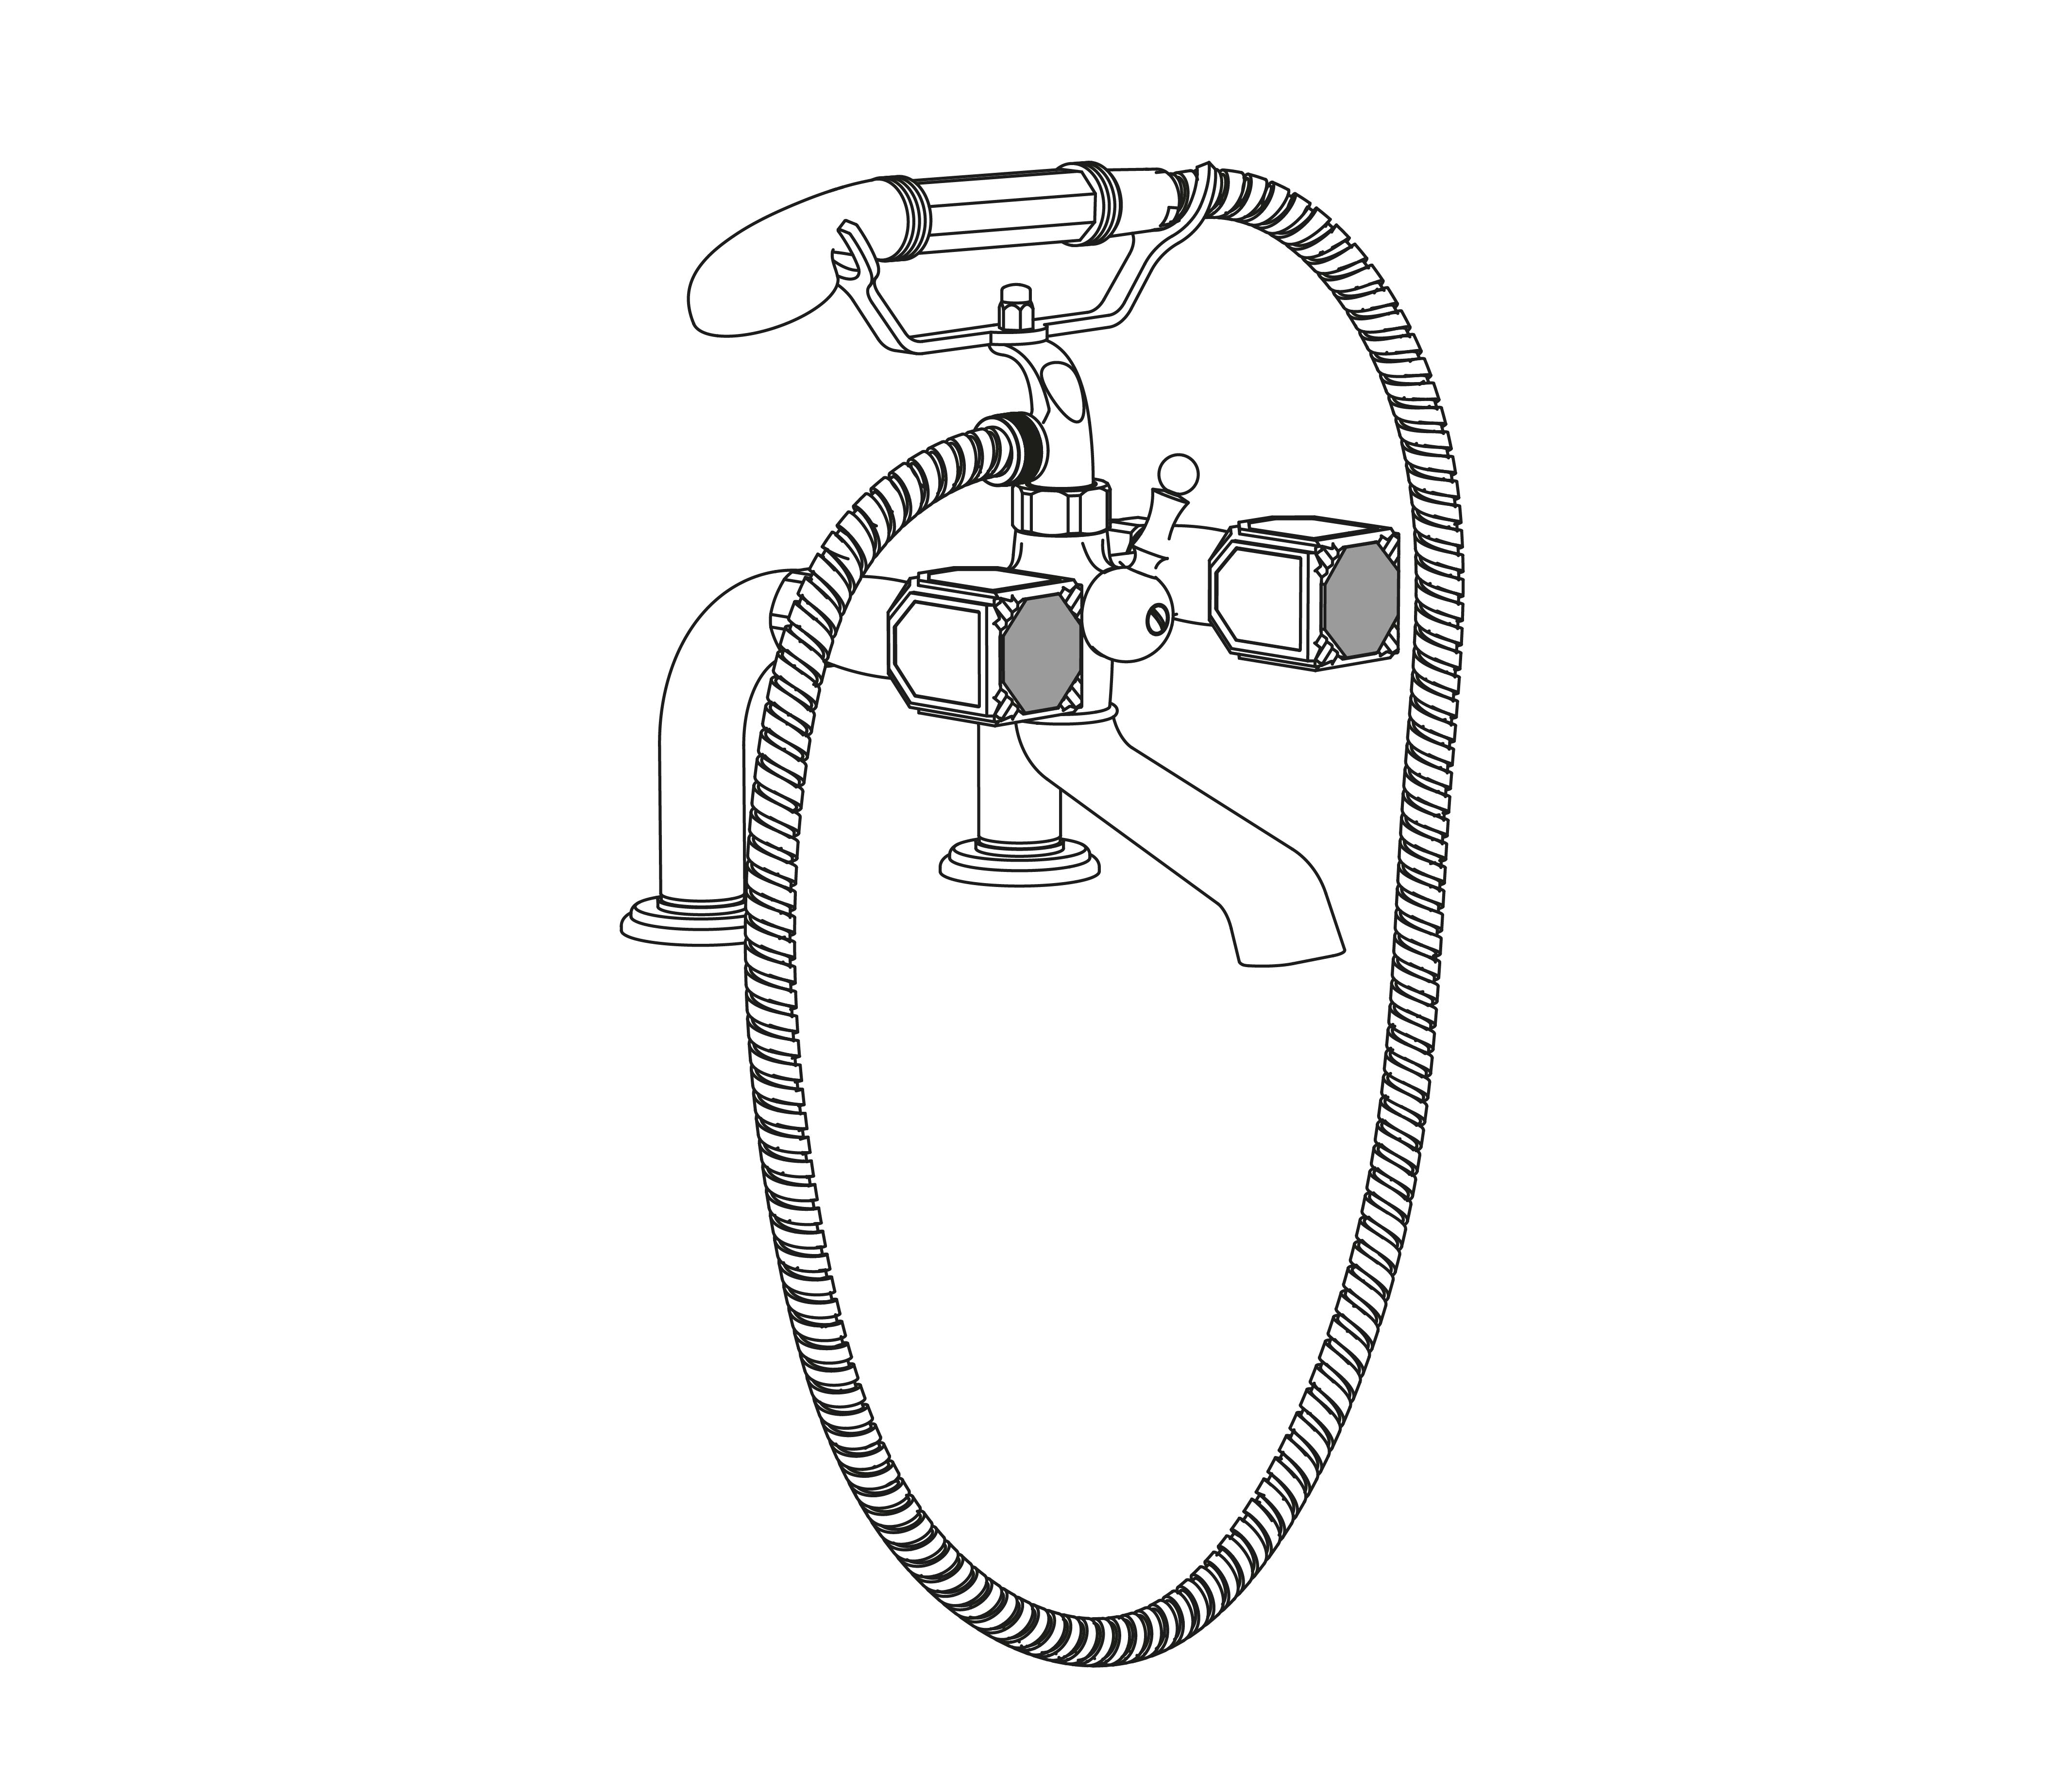 S60-3306 Rim mounted bath and shower mixer